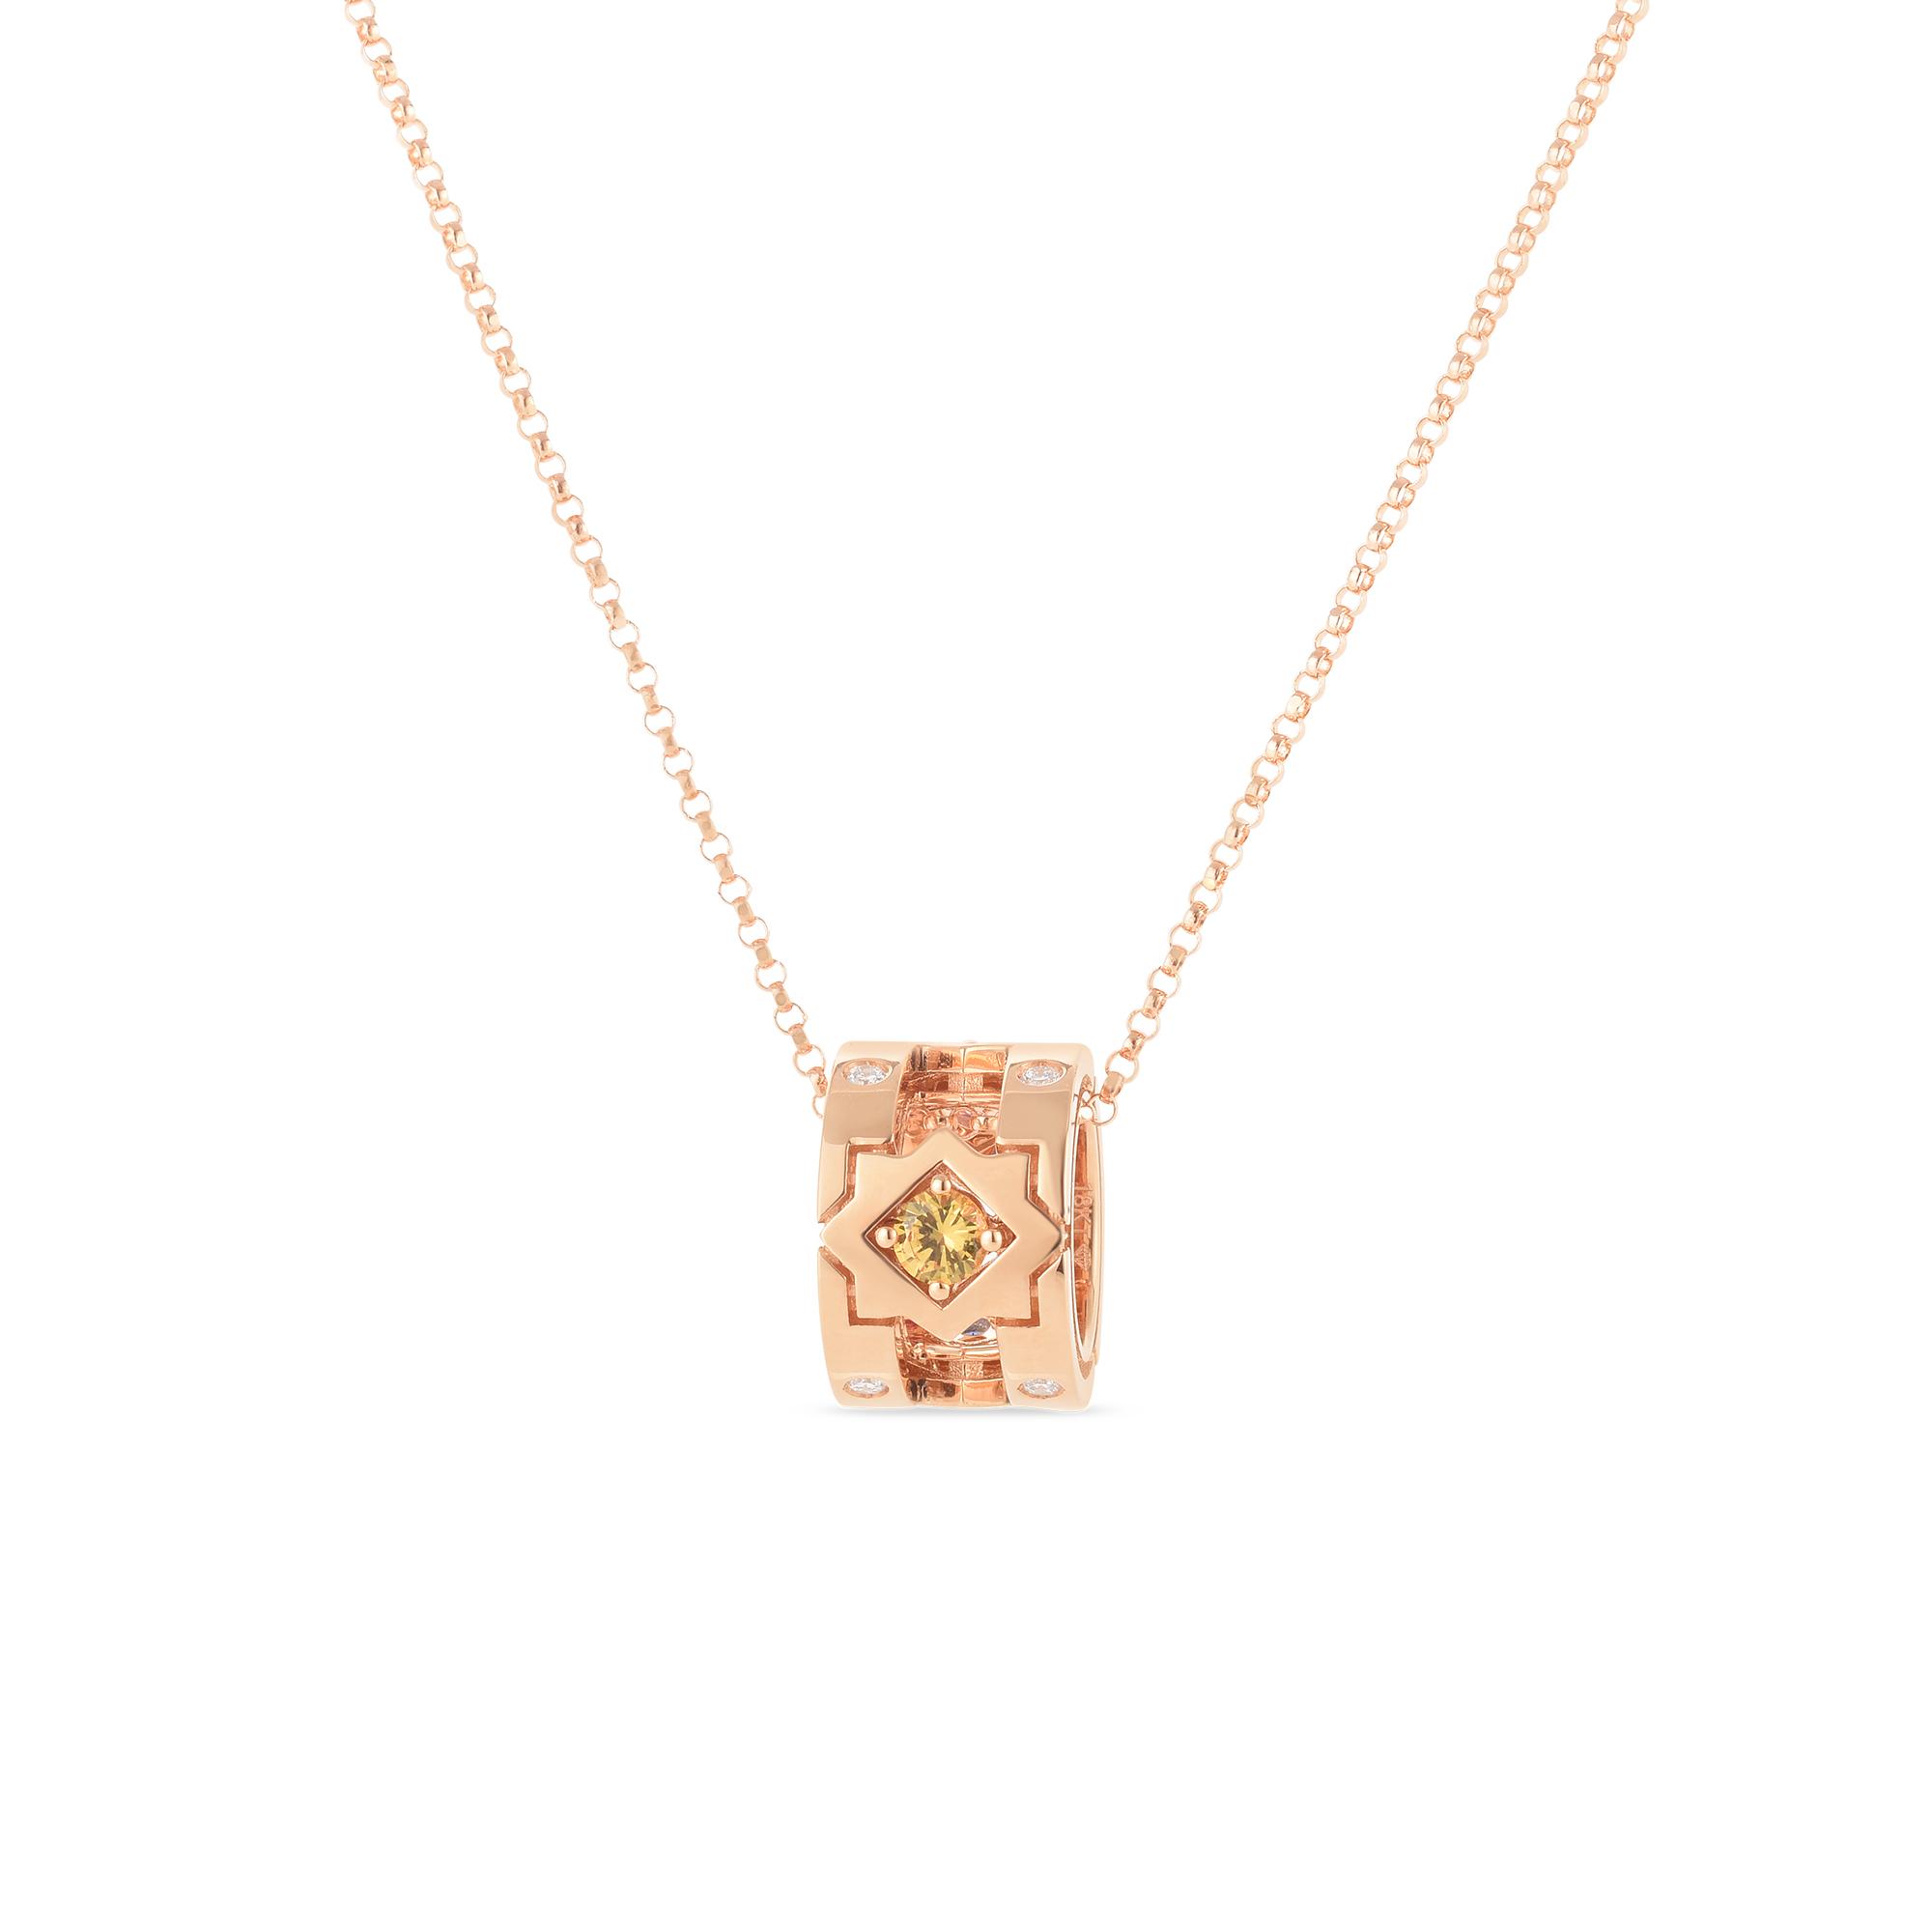 Roberto Coin Navarra Rose Gold Mixed Sapphire Pendant Necklace with Diamonds 0